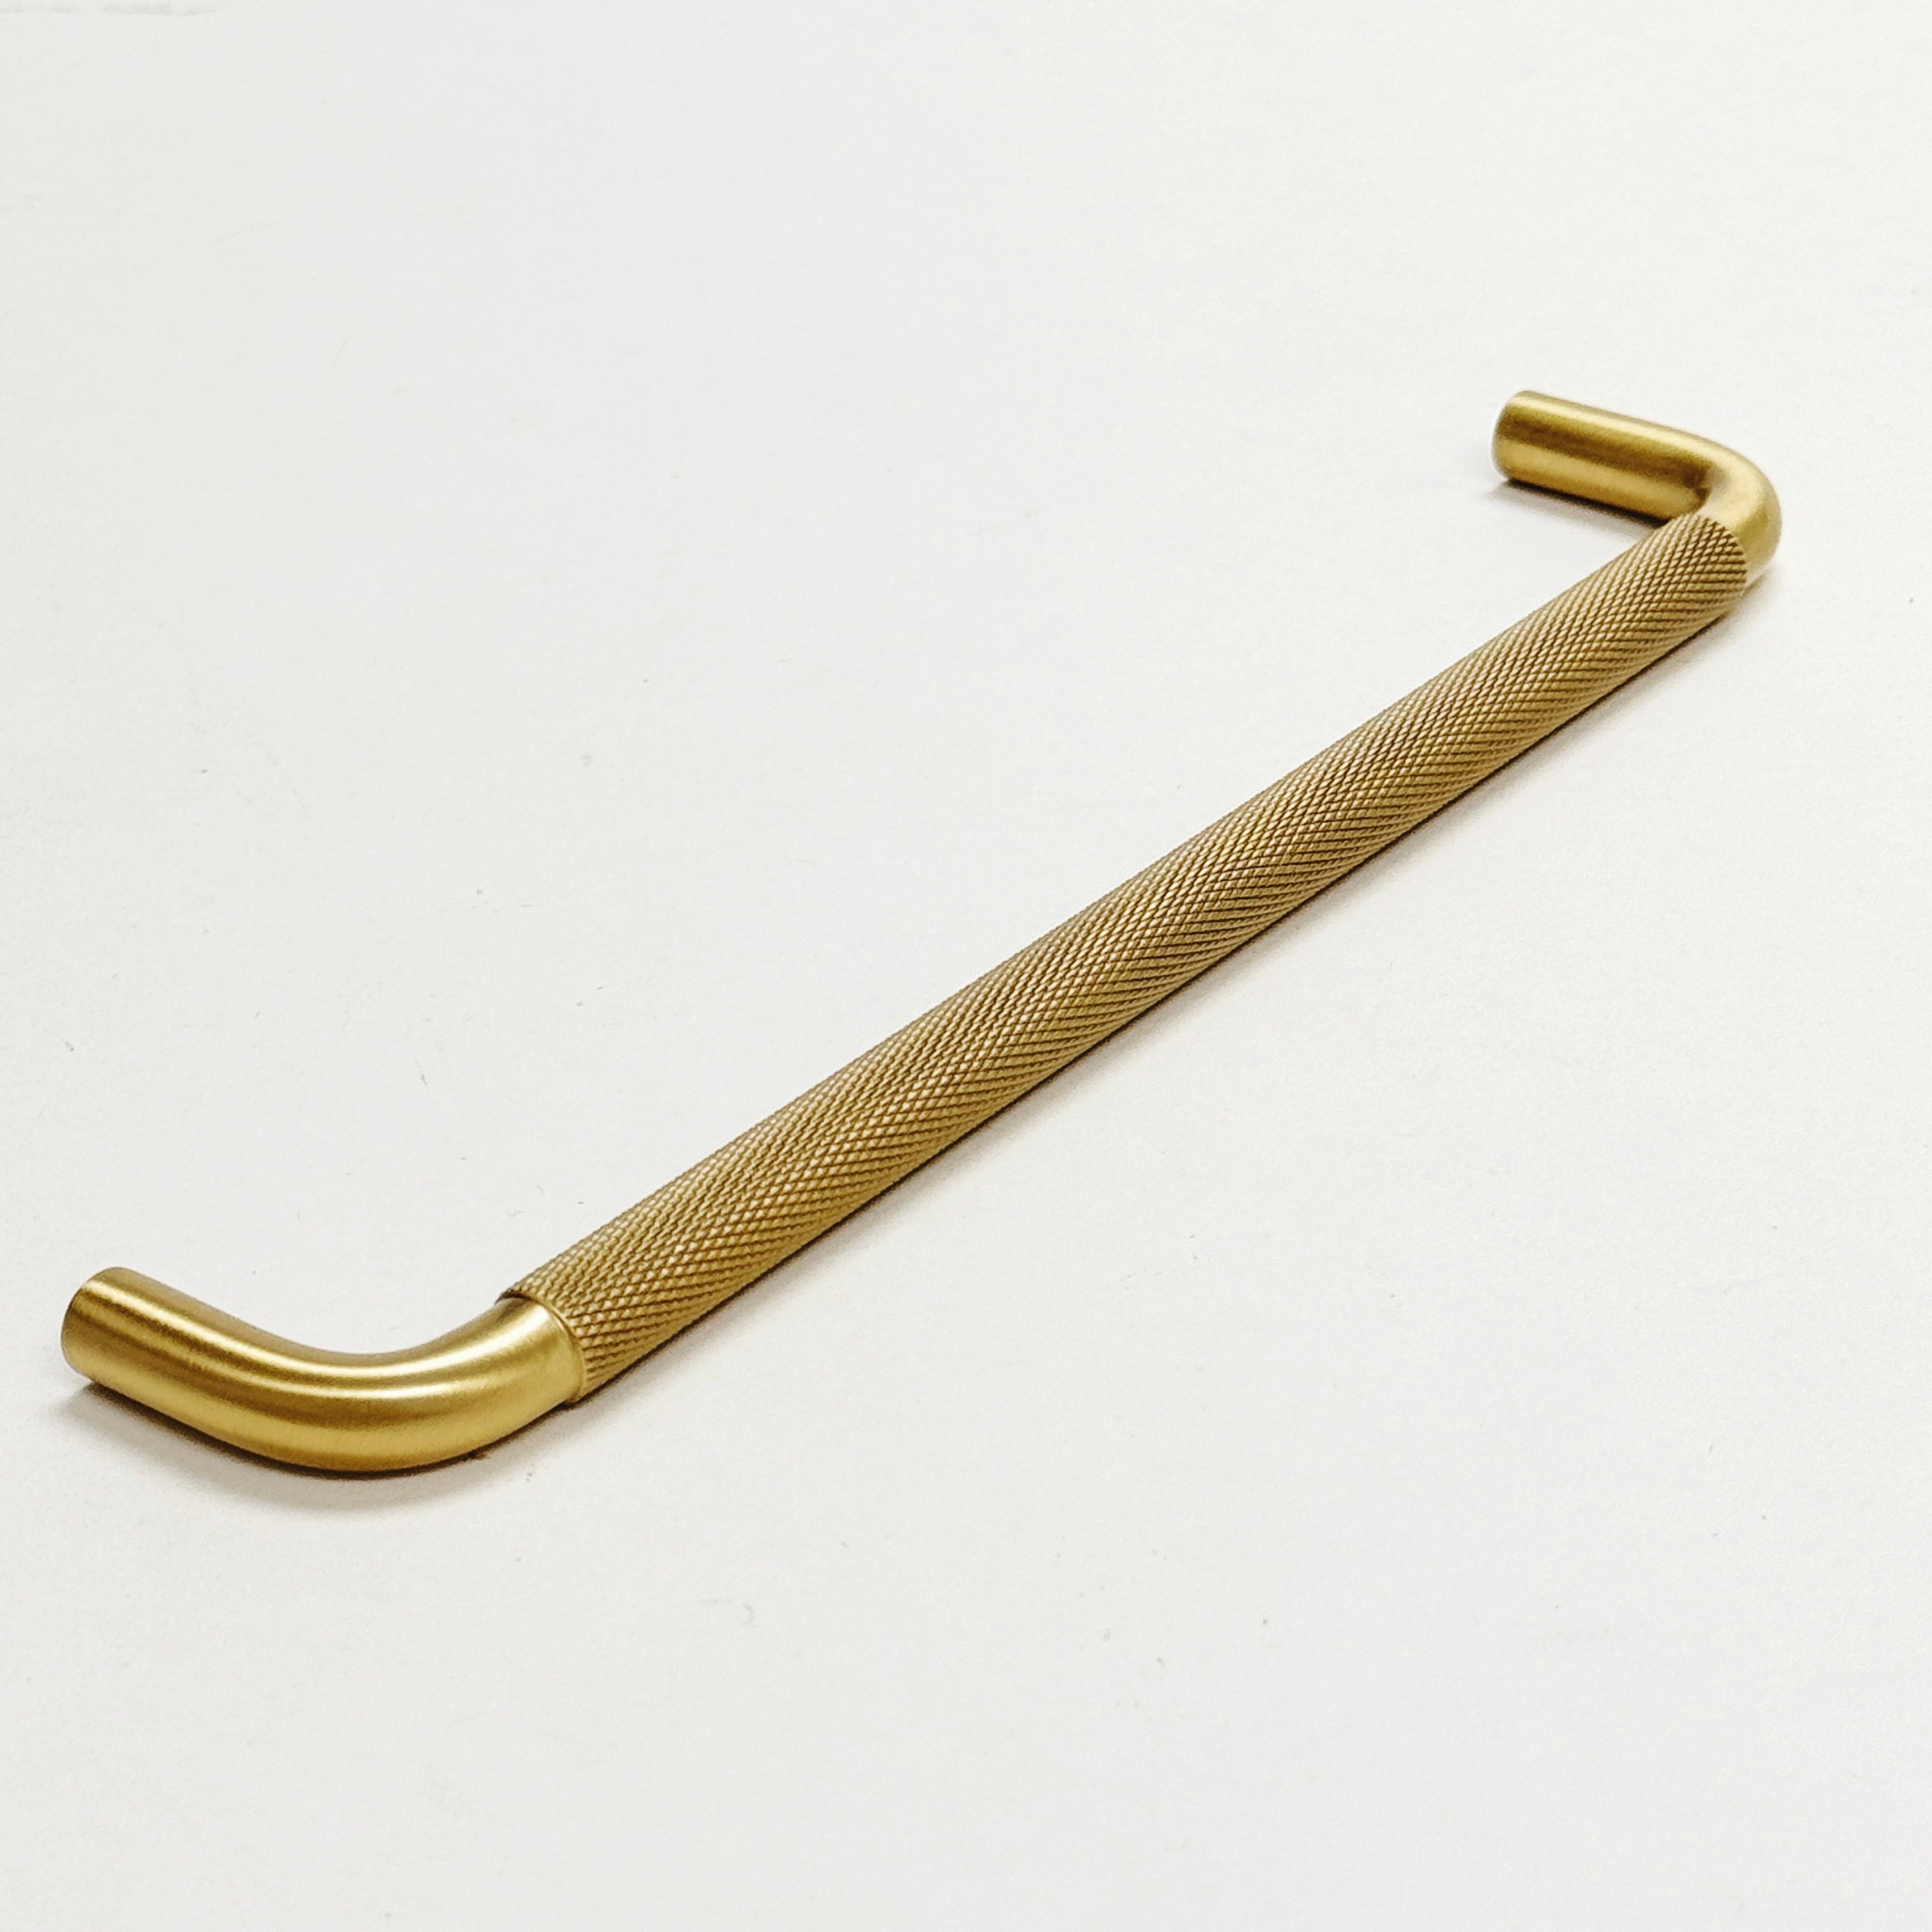 Satin Brass Knurled Wire Cabinet Knob and Drawer Pulls - Industry Hardware